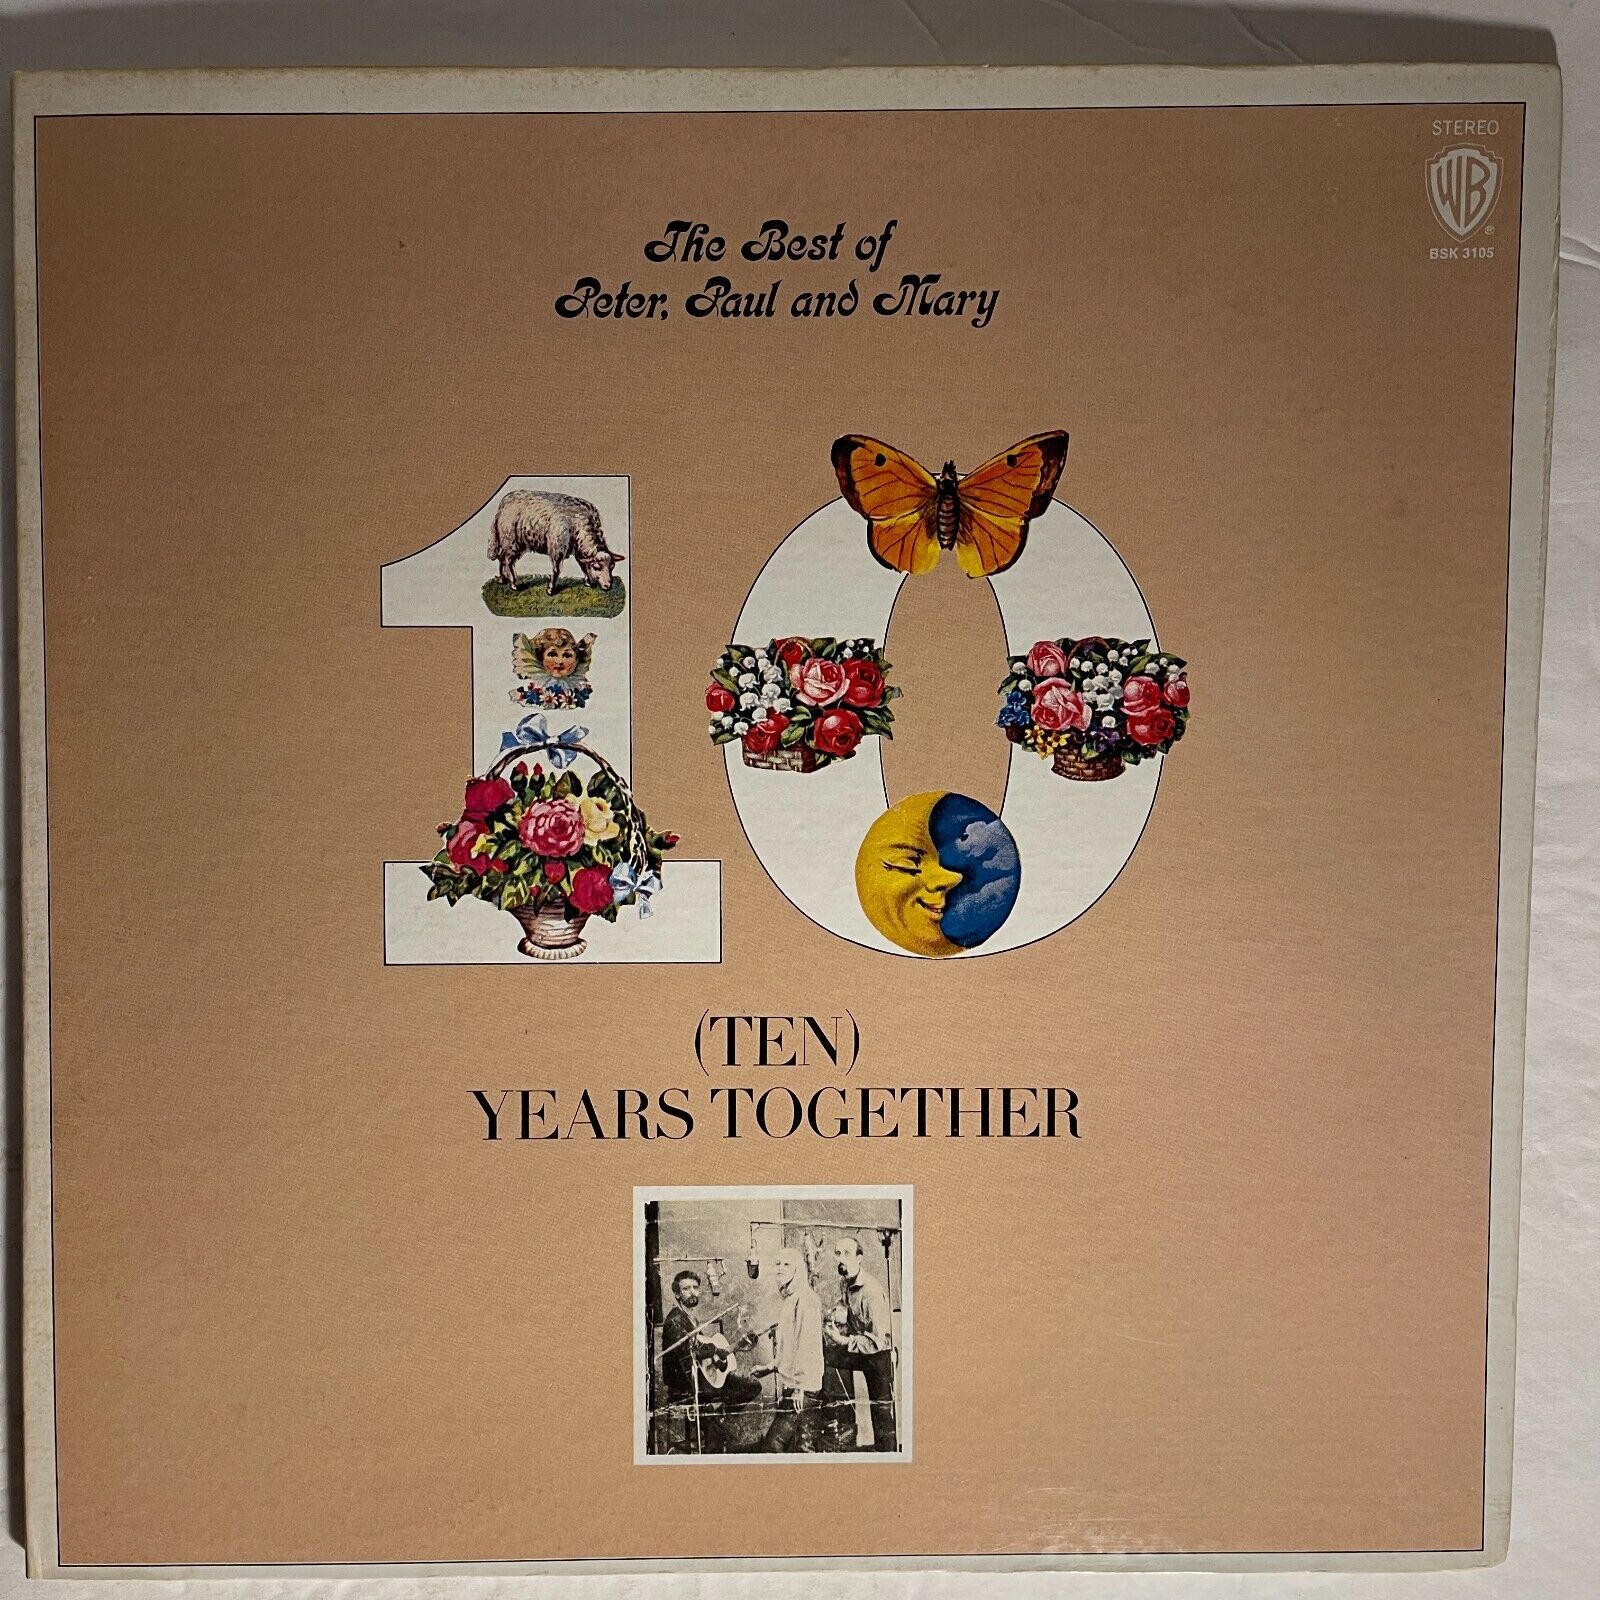 Peter, Paul And Mary - (Ten) Years Together (The Best Of Peter, Paul And Mary)